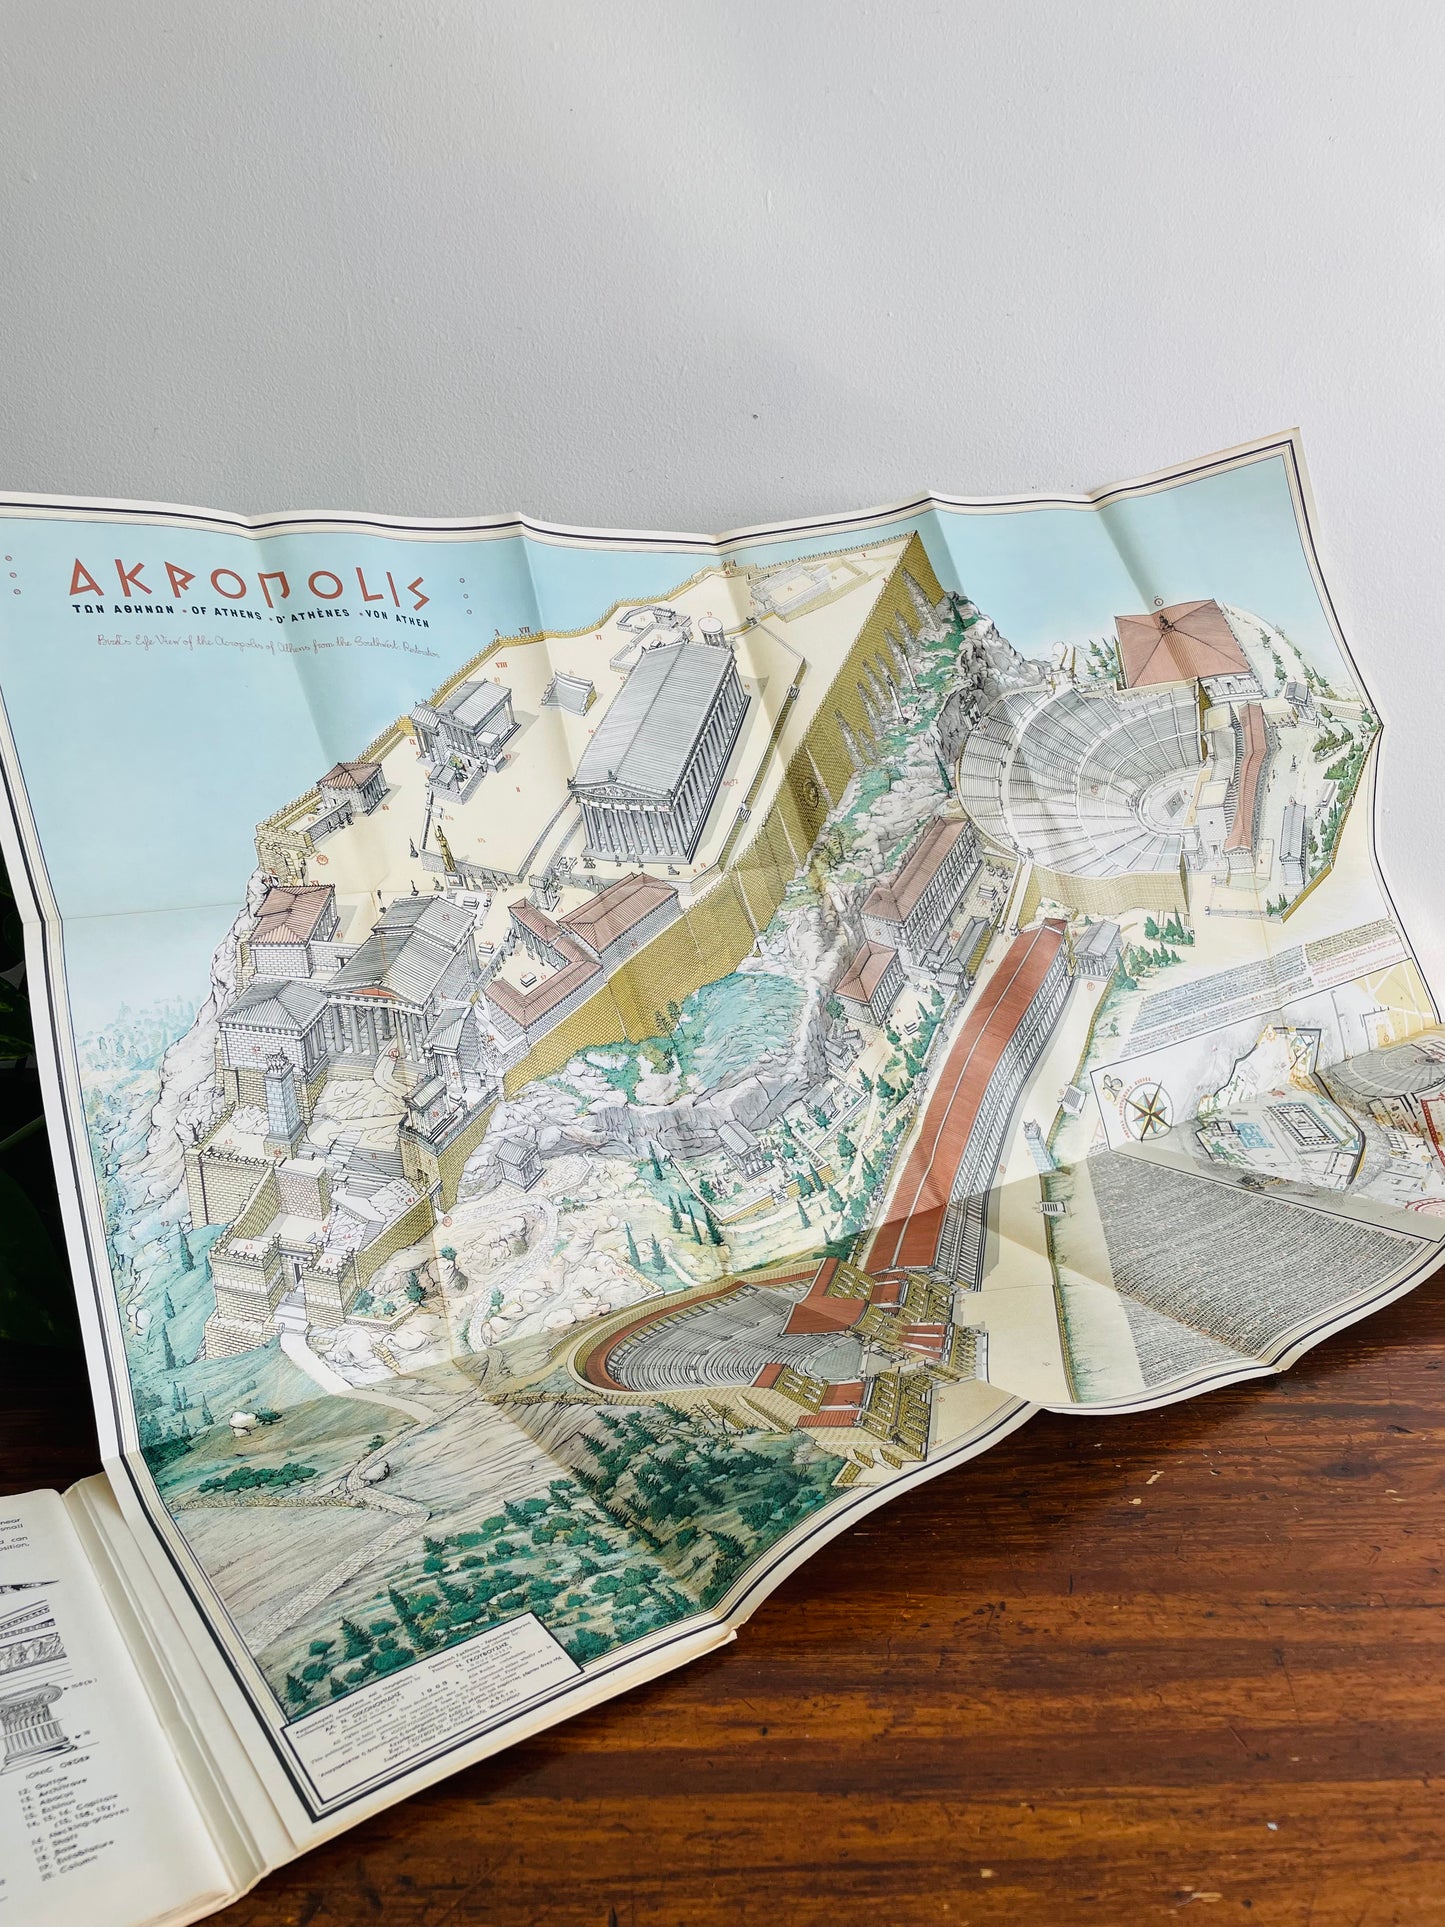 The Akropolis of Athens, Greece - Illustrations, Photos, Guide, & Fold-Out Map (1971)